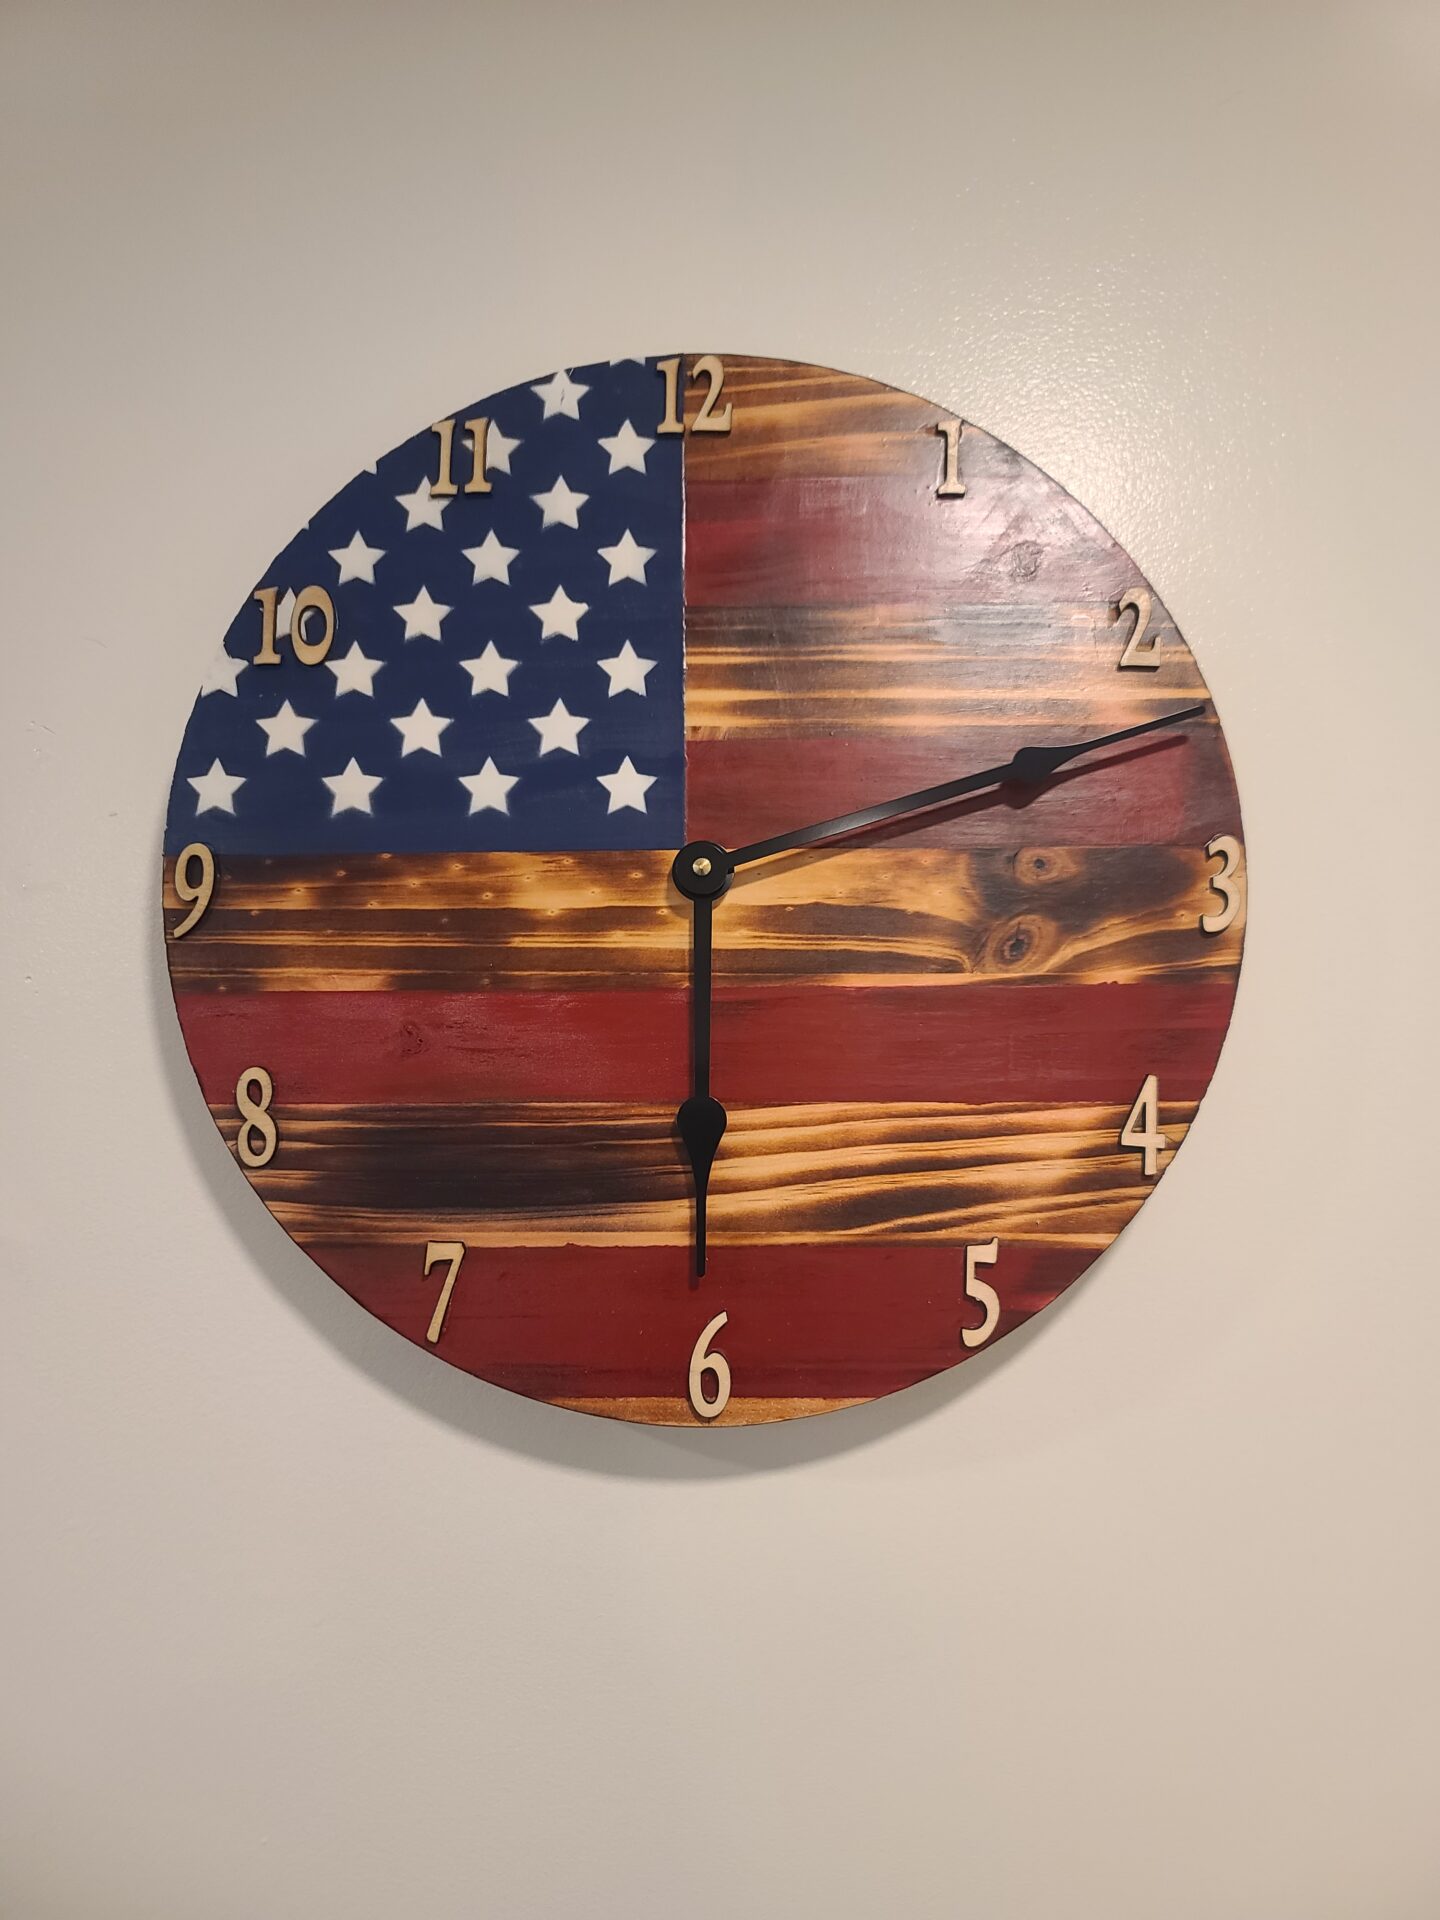 14" wooden wall clock decorated in US flag theme and laser cut numbers attached, home decor, gift for family, home essential, patriotic gift